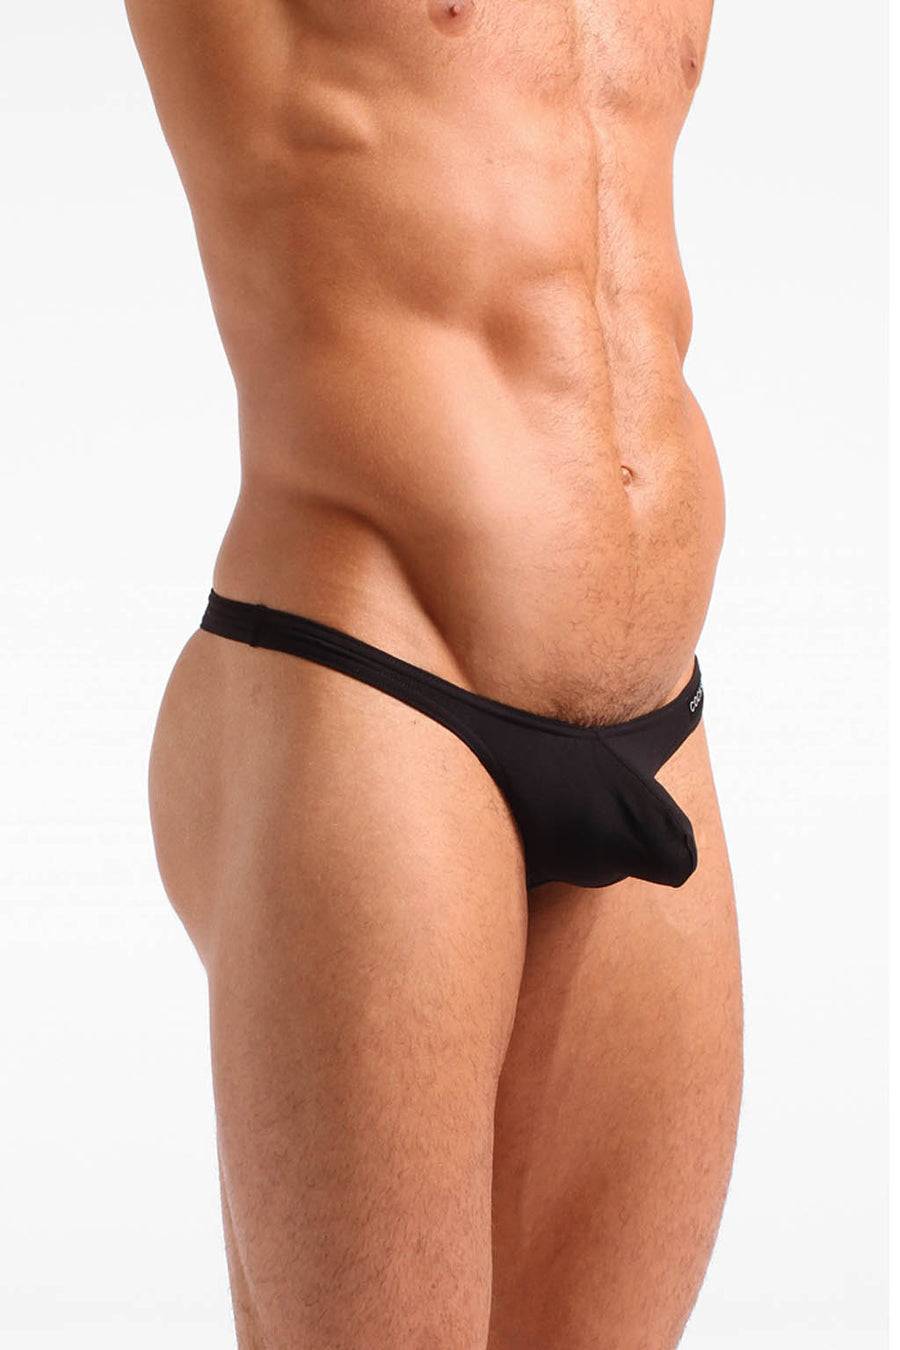 Cocksox® Mens Low Rise Bulge Pouch Thong Underwear